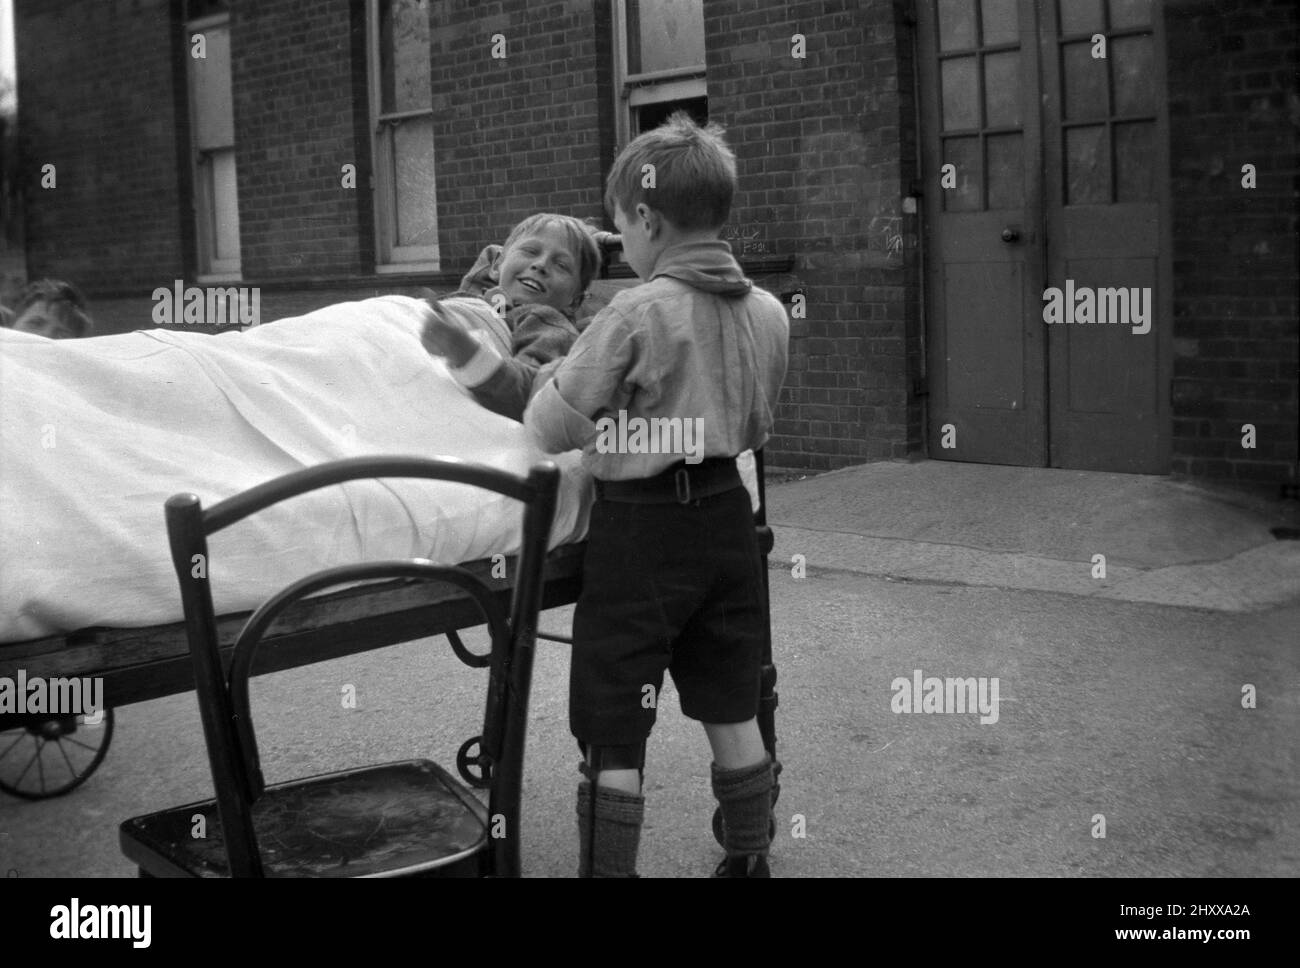 1942, historical, injured boy scout in leg braces, standing outside talking to another boy lying in a metal bed, Queen Mary's Hospital in Carshalton, Surrey, England, UK. Opened in 1908 as the Southern Hospital, in 1909 it became a place for the poor and sick children of London, many who had TB and was renamed the Children's Infirmary. The young patients were housed in single-storey ward blocks or 'cottages'. In 1915 it was renamed Queen's Mary Hospital for Children when Her Majesty became its patron. During WW2 the boy scouts who injured during the London Blitz were sent there for to recover. Stock Photo